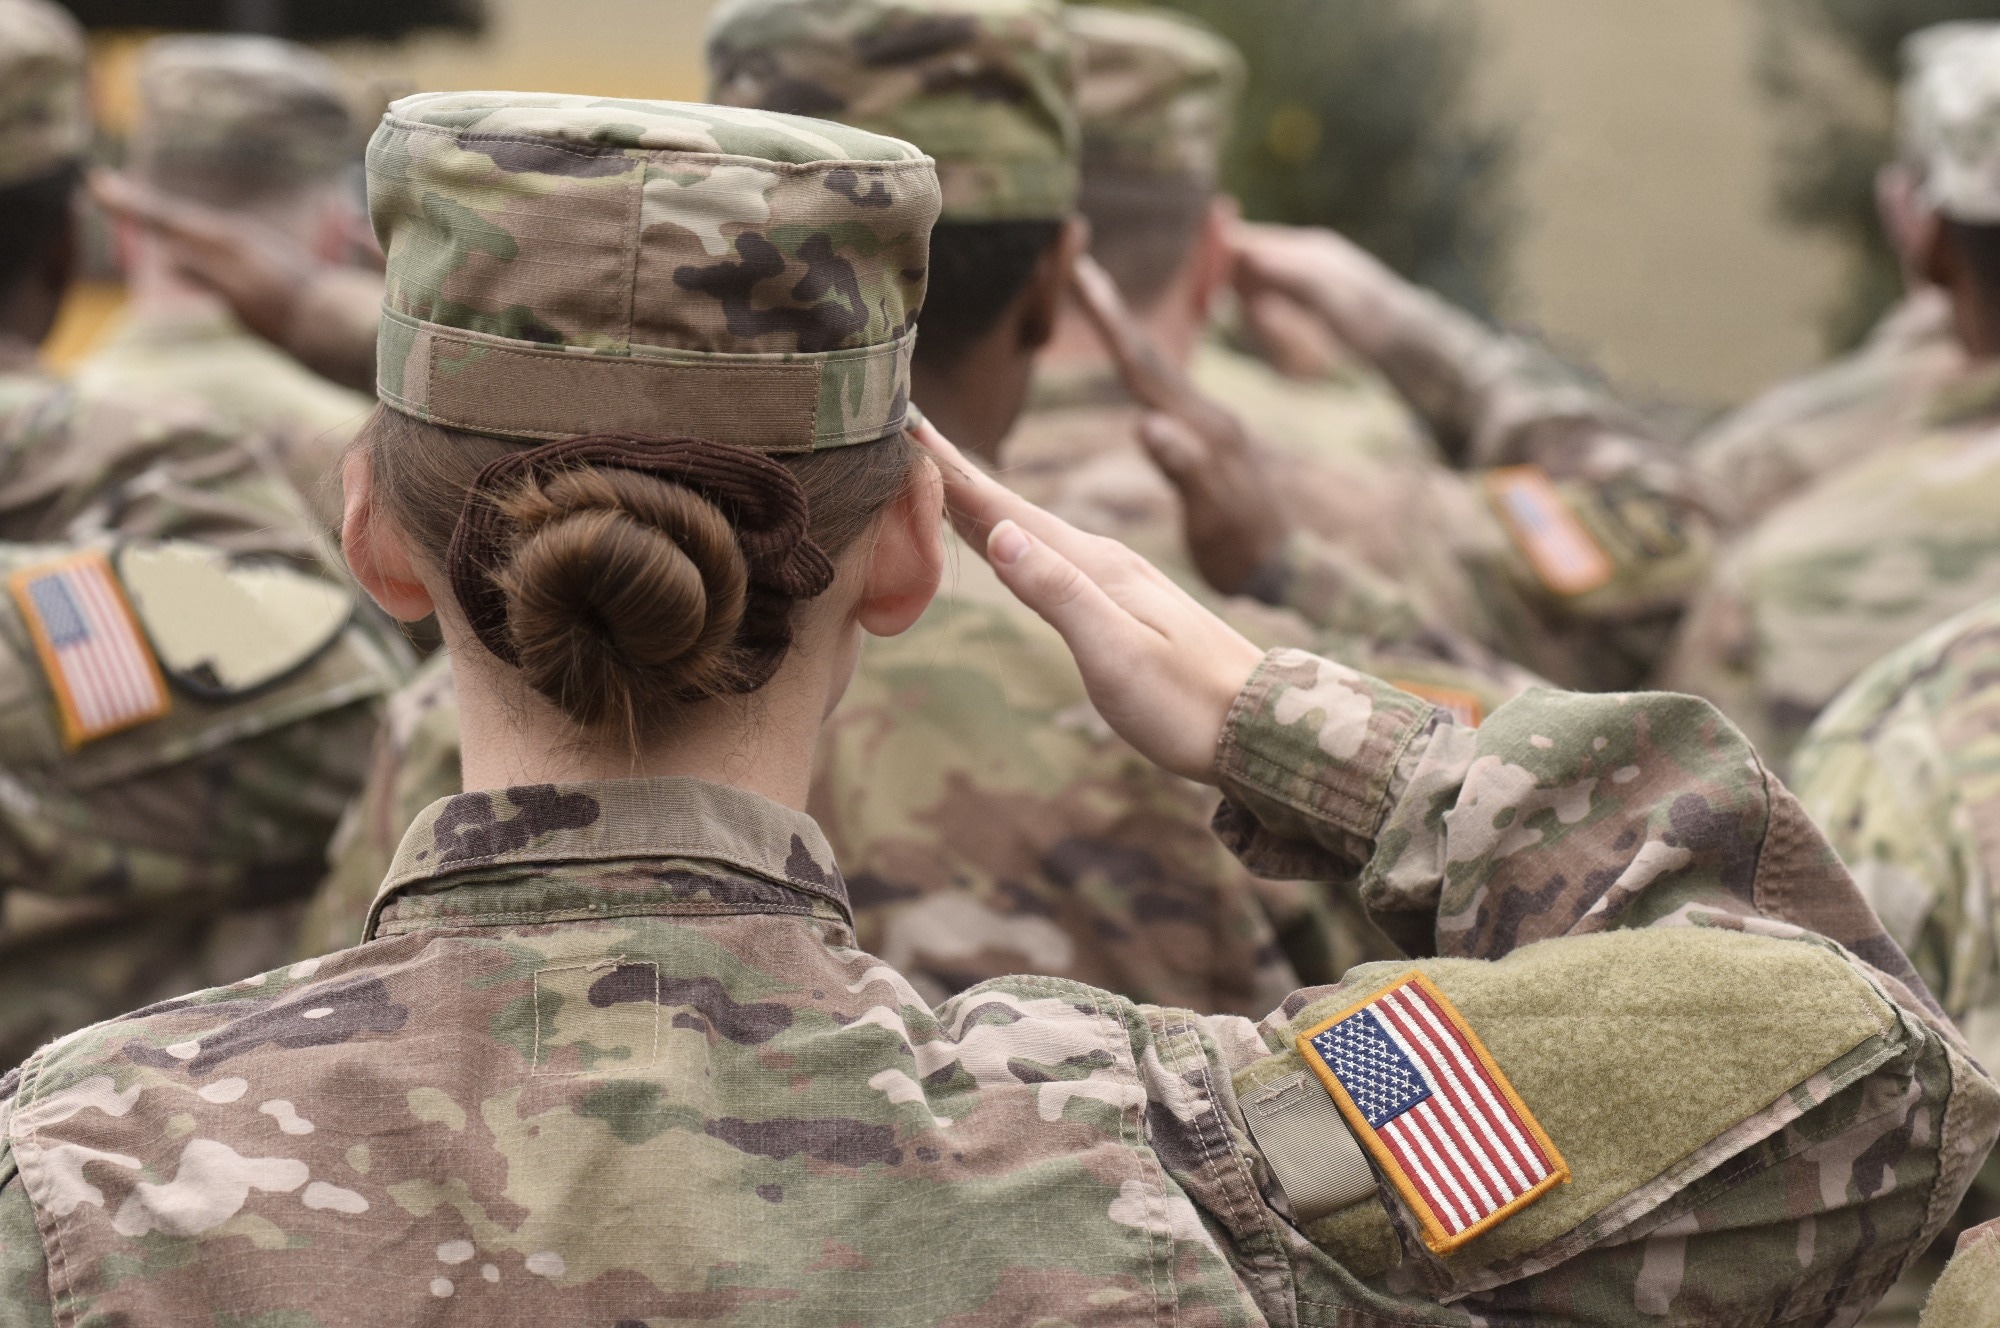 Study: Effect of active-duty military service on neonatal birth outcomes: a systematic review. Image Credit: Bumble Dee/Shutterstock.com